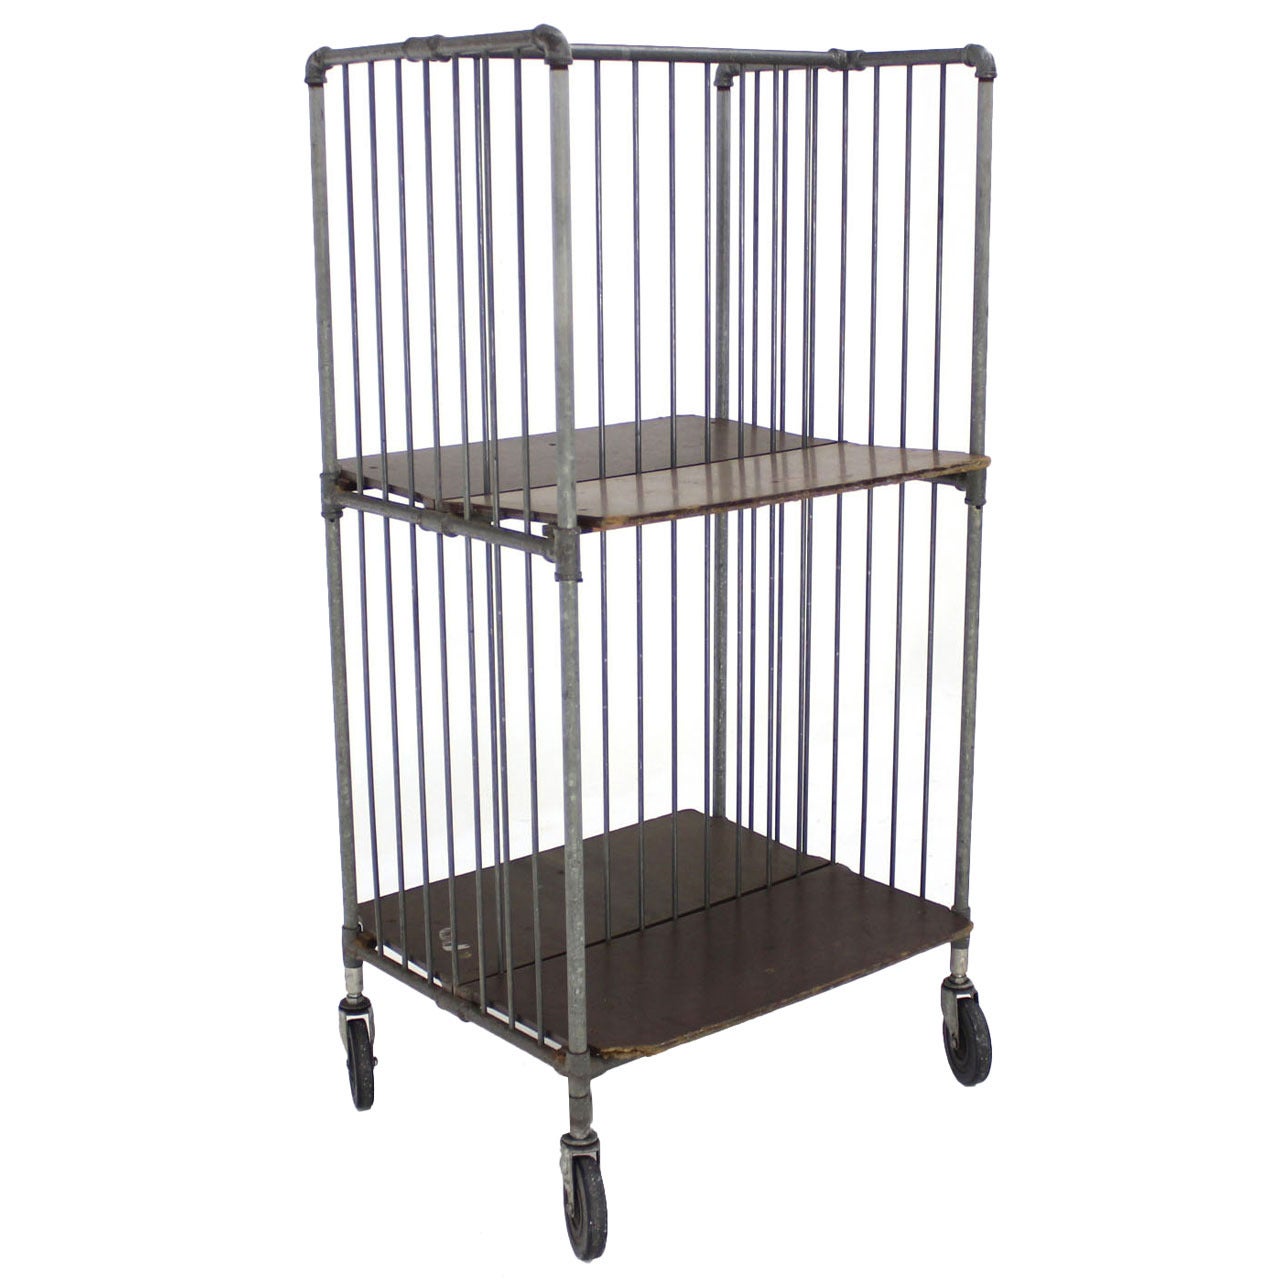 Heavy Industrial Mid-Century Modern Cart Rack with Storage Shelves